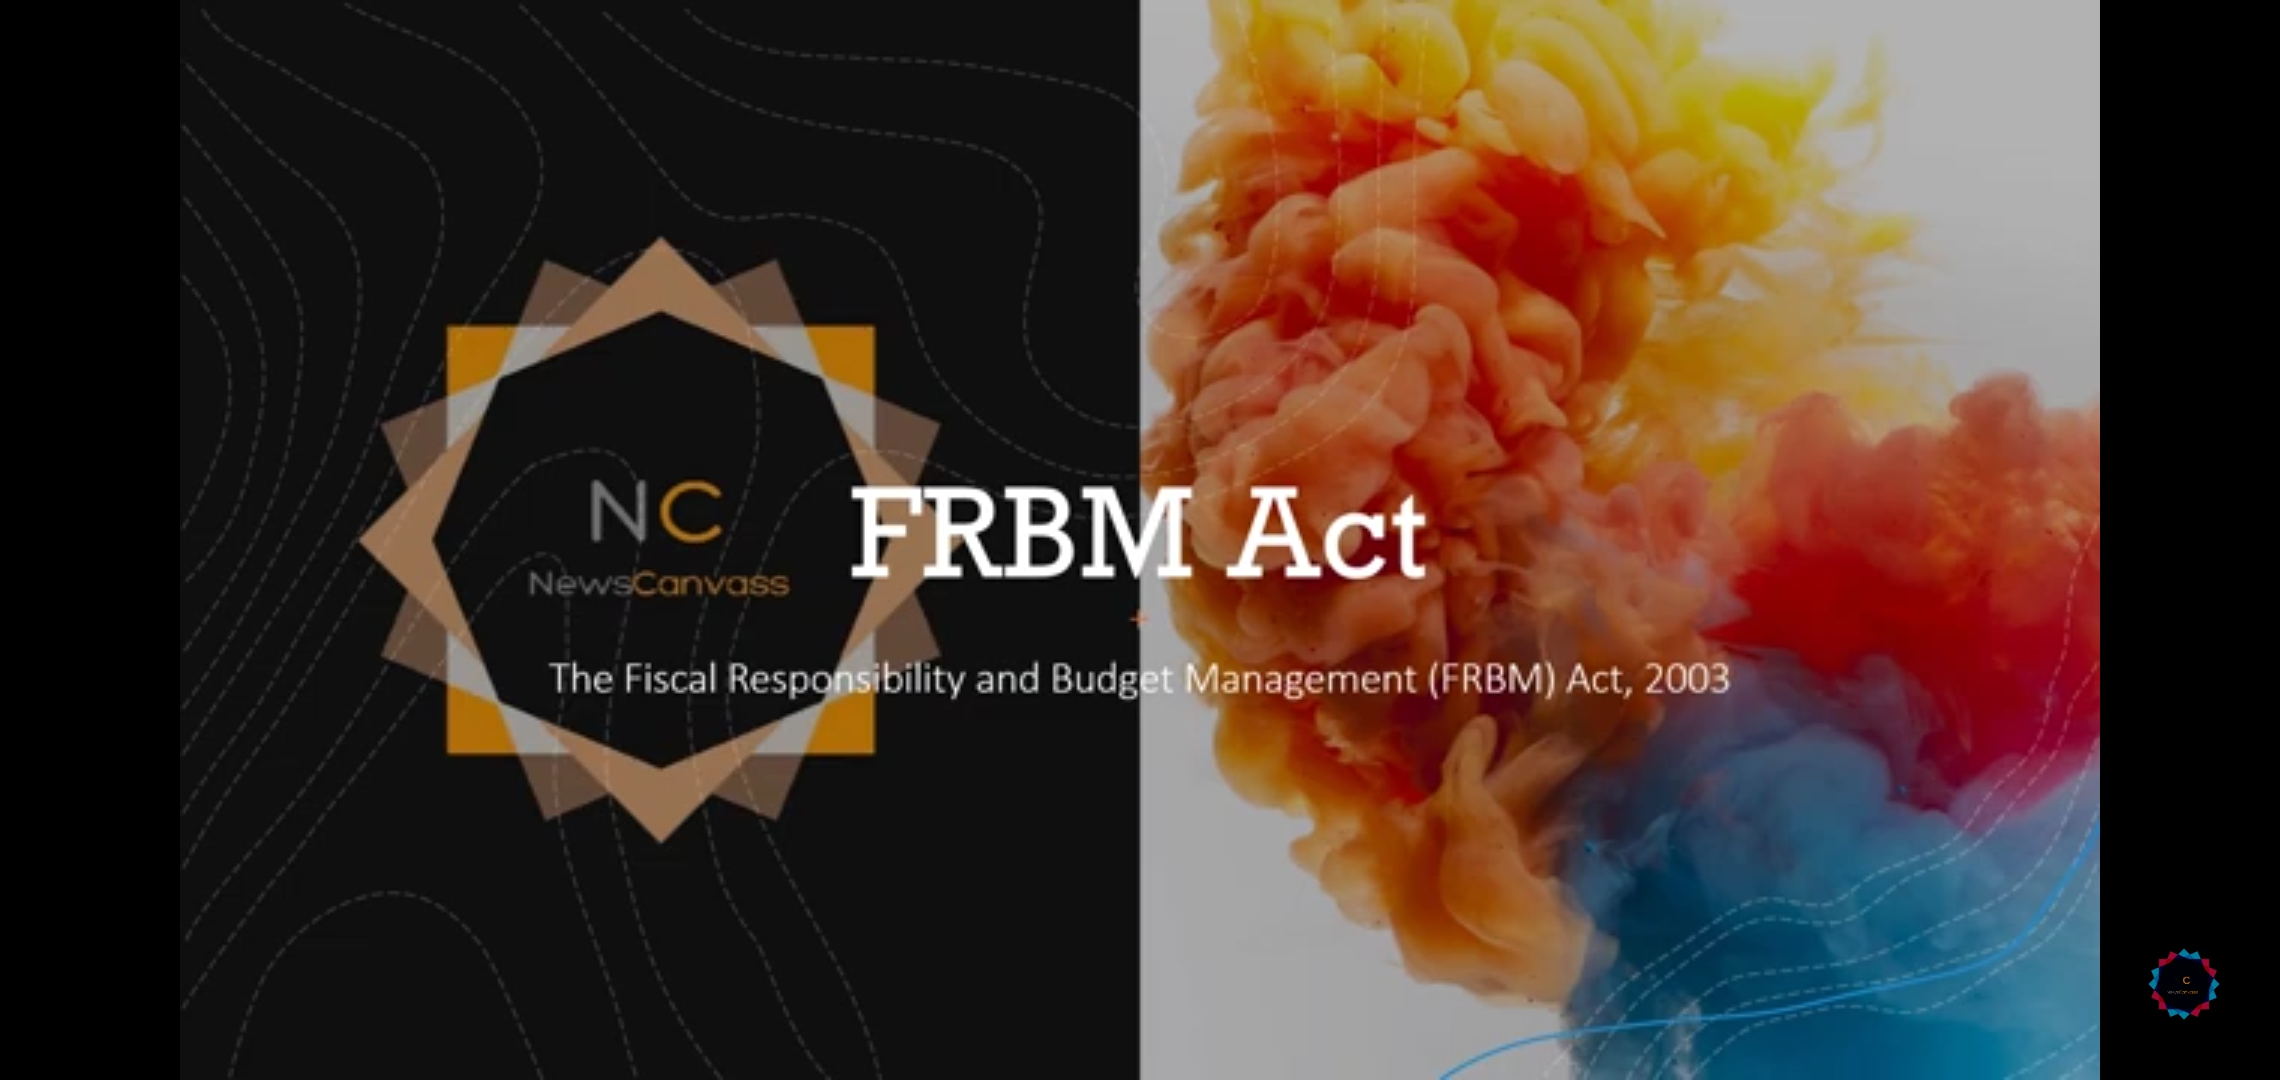 FRBM (he Fiscal Responsibility and Budget Management) Act